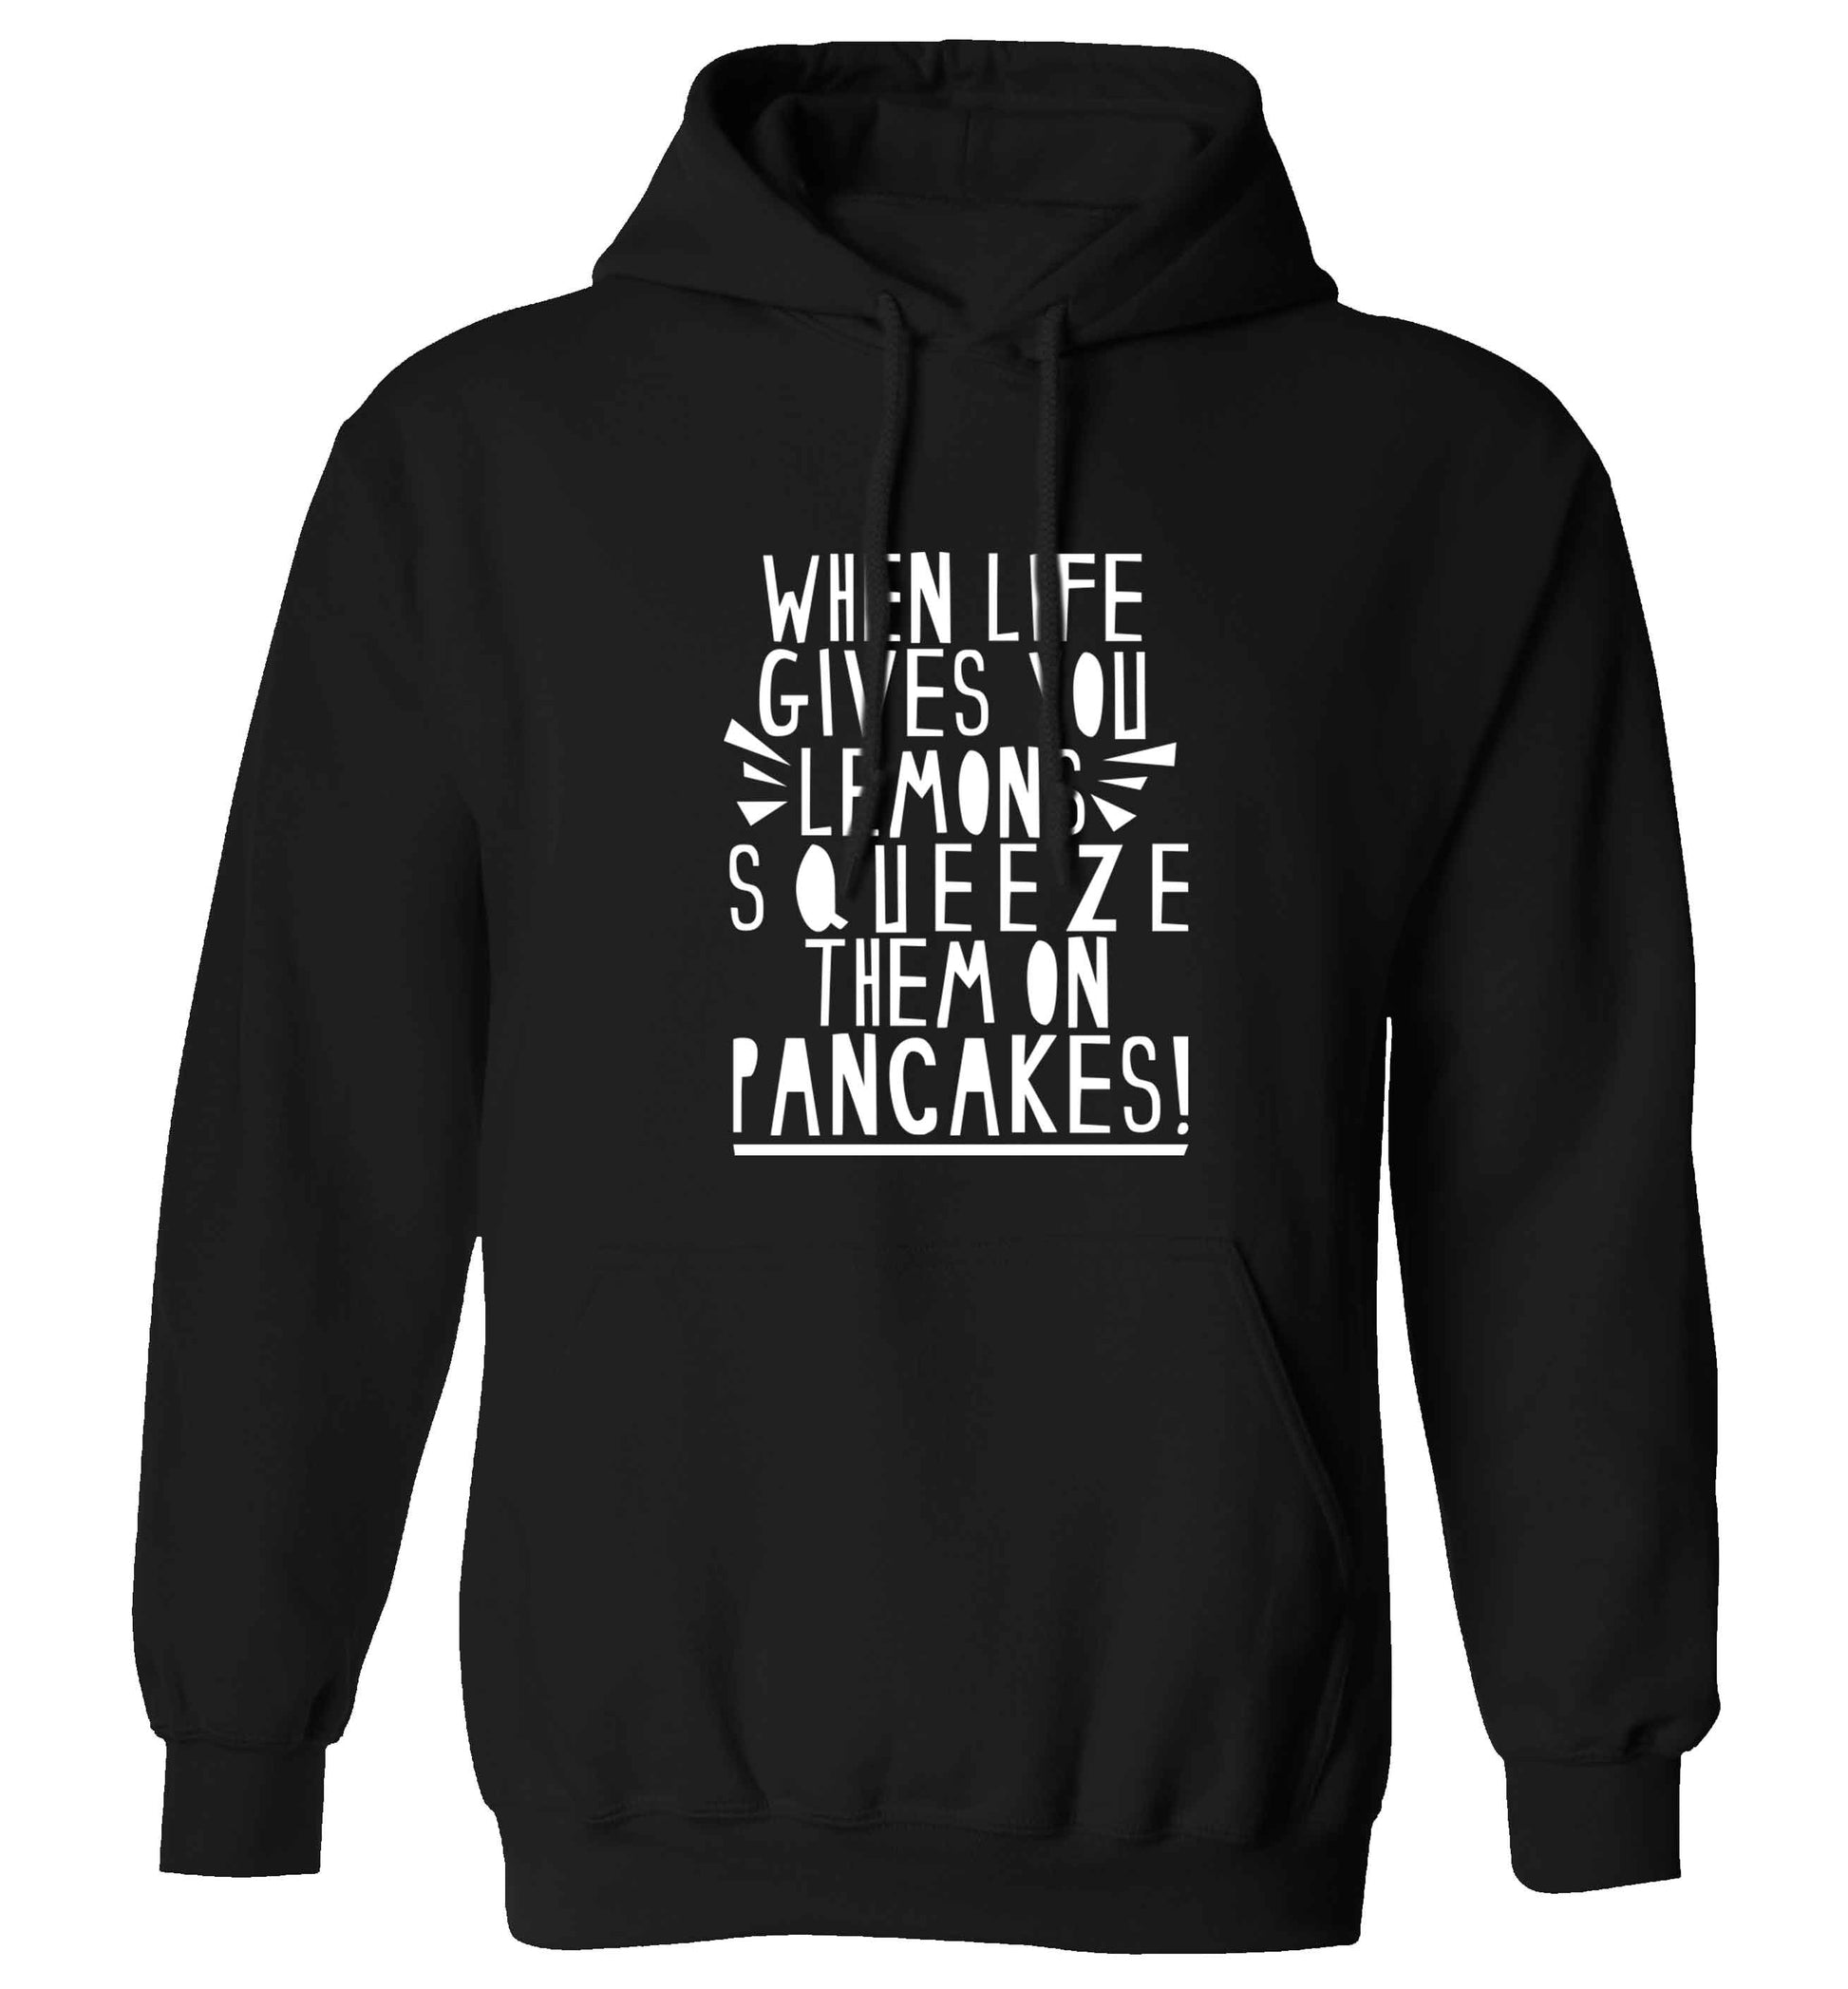 When life gives you lemons squeeze them on pancakes! adults unisex black hoodie 2XL